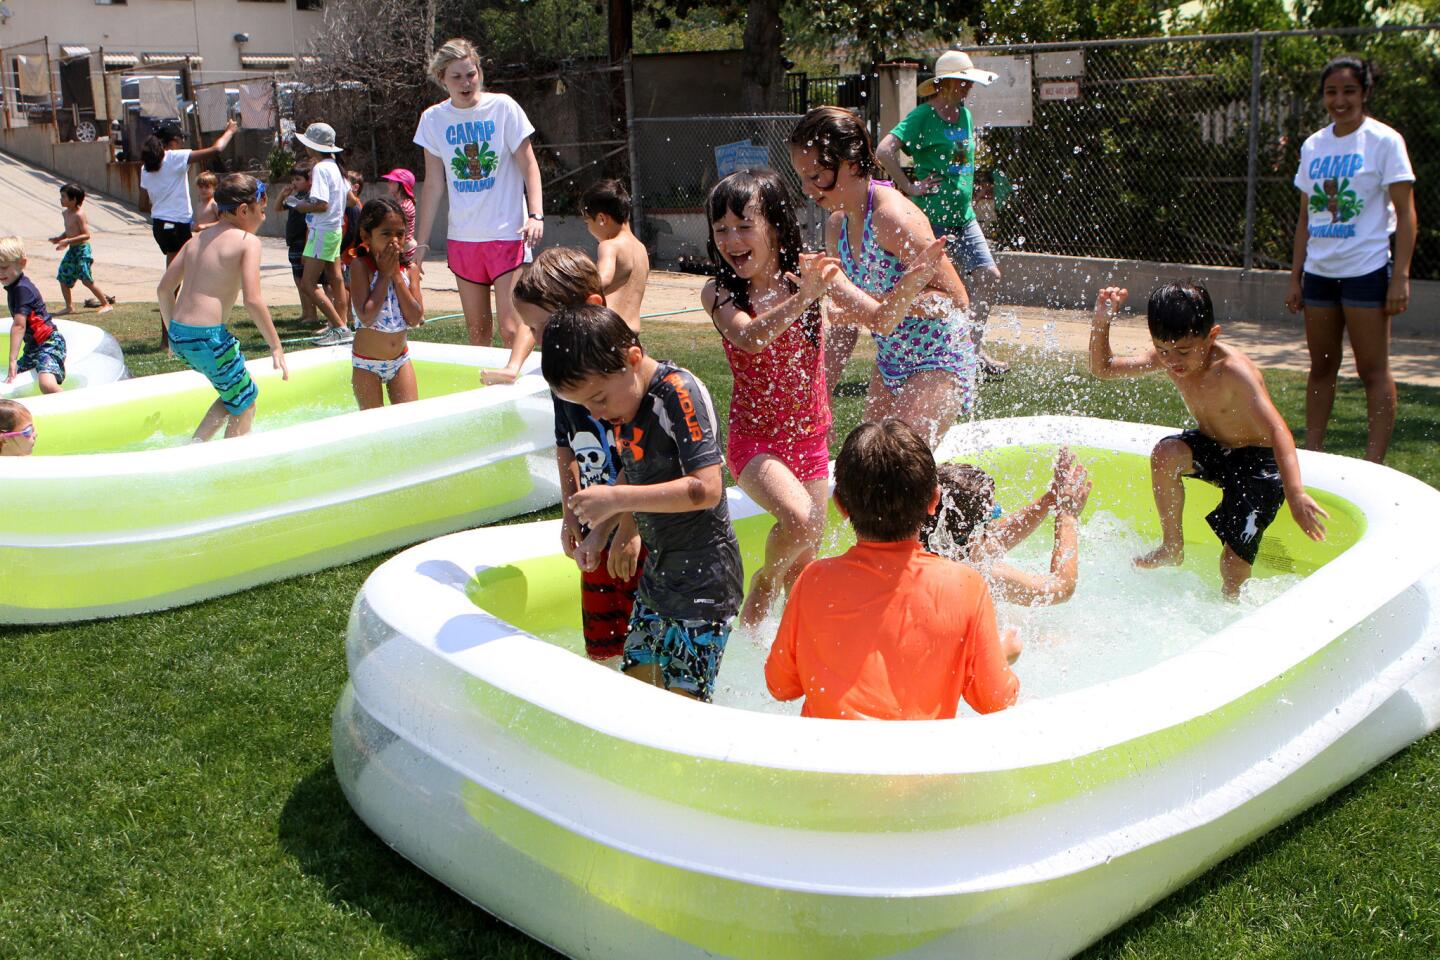 Photo Gallery: Camp Runamuk brings in the water slide to battle the heat wave